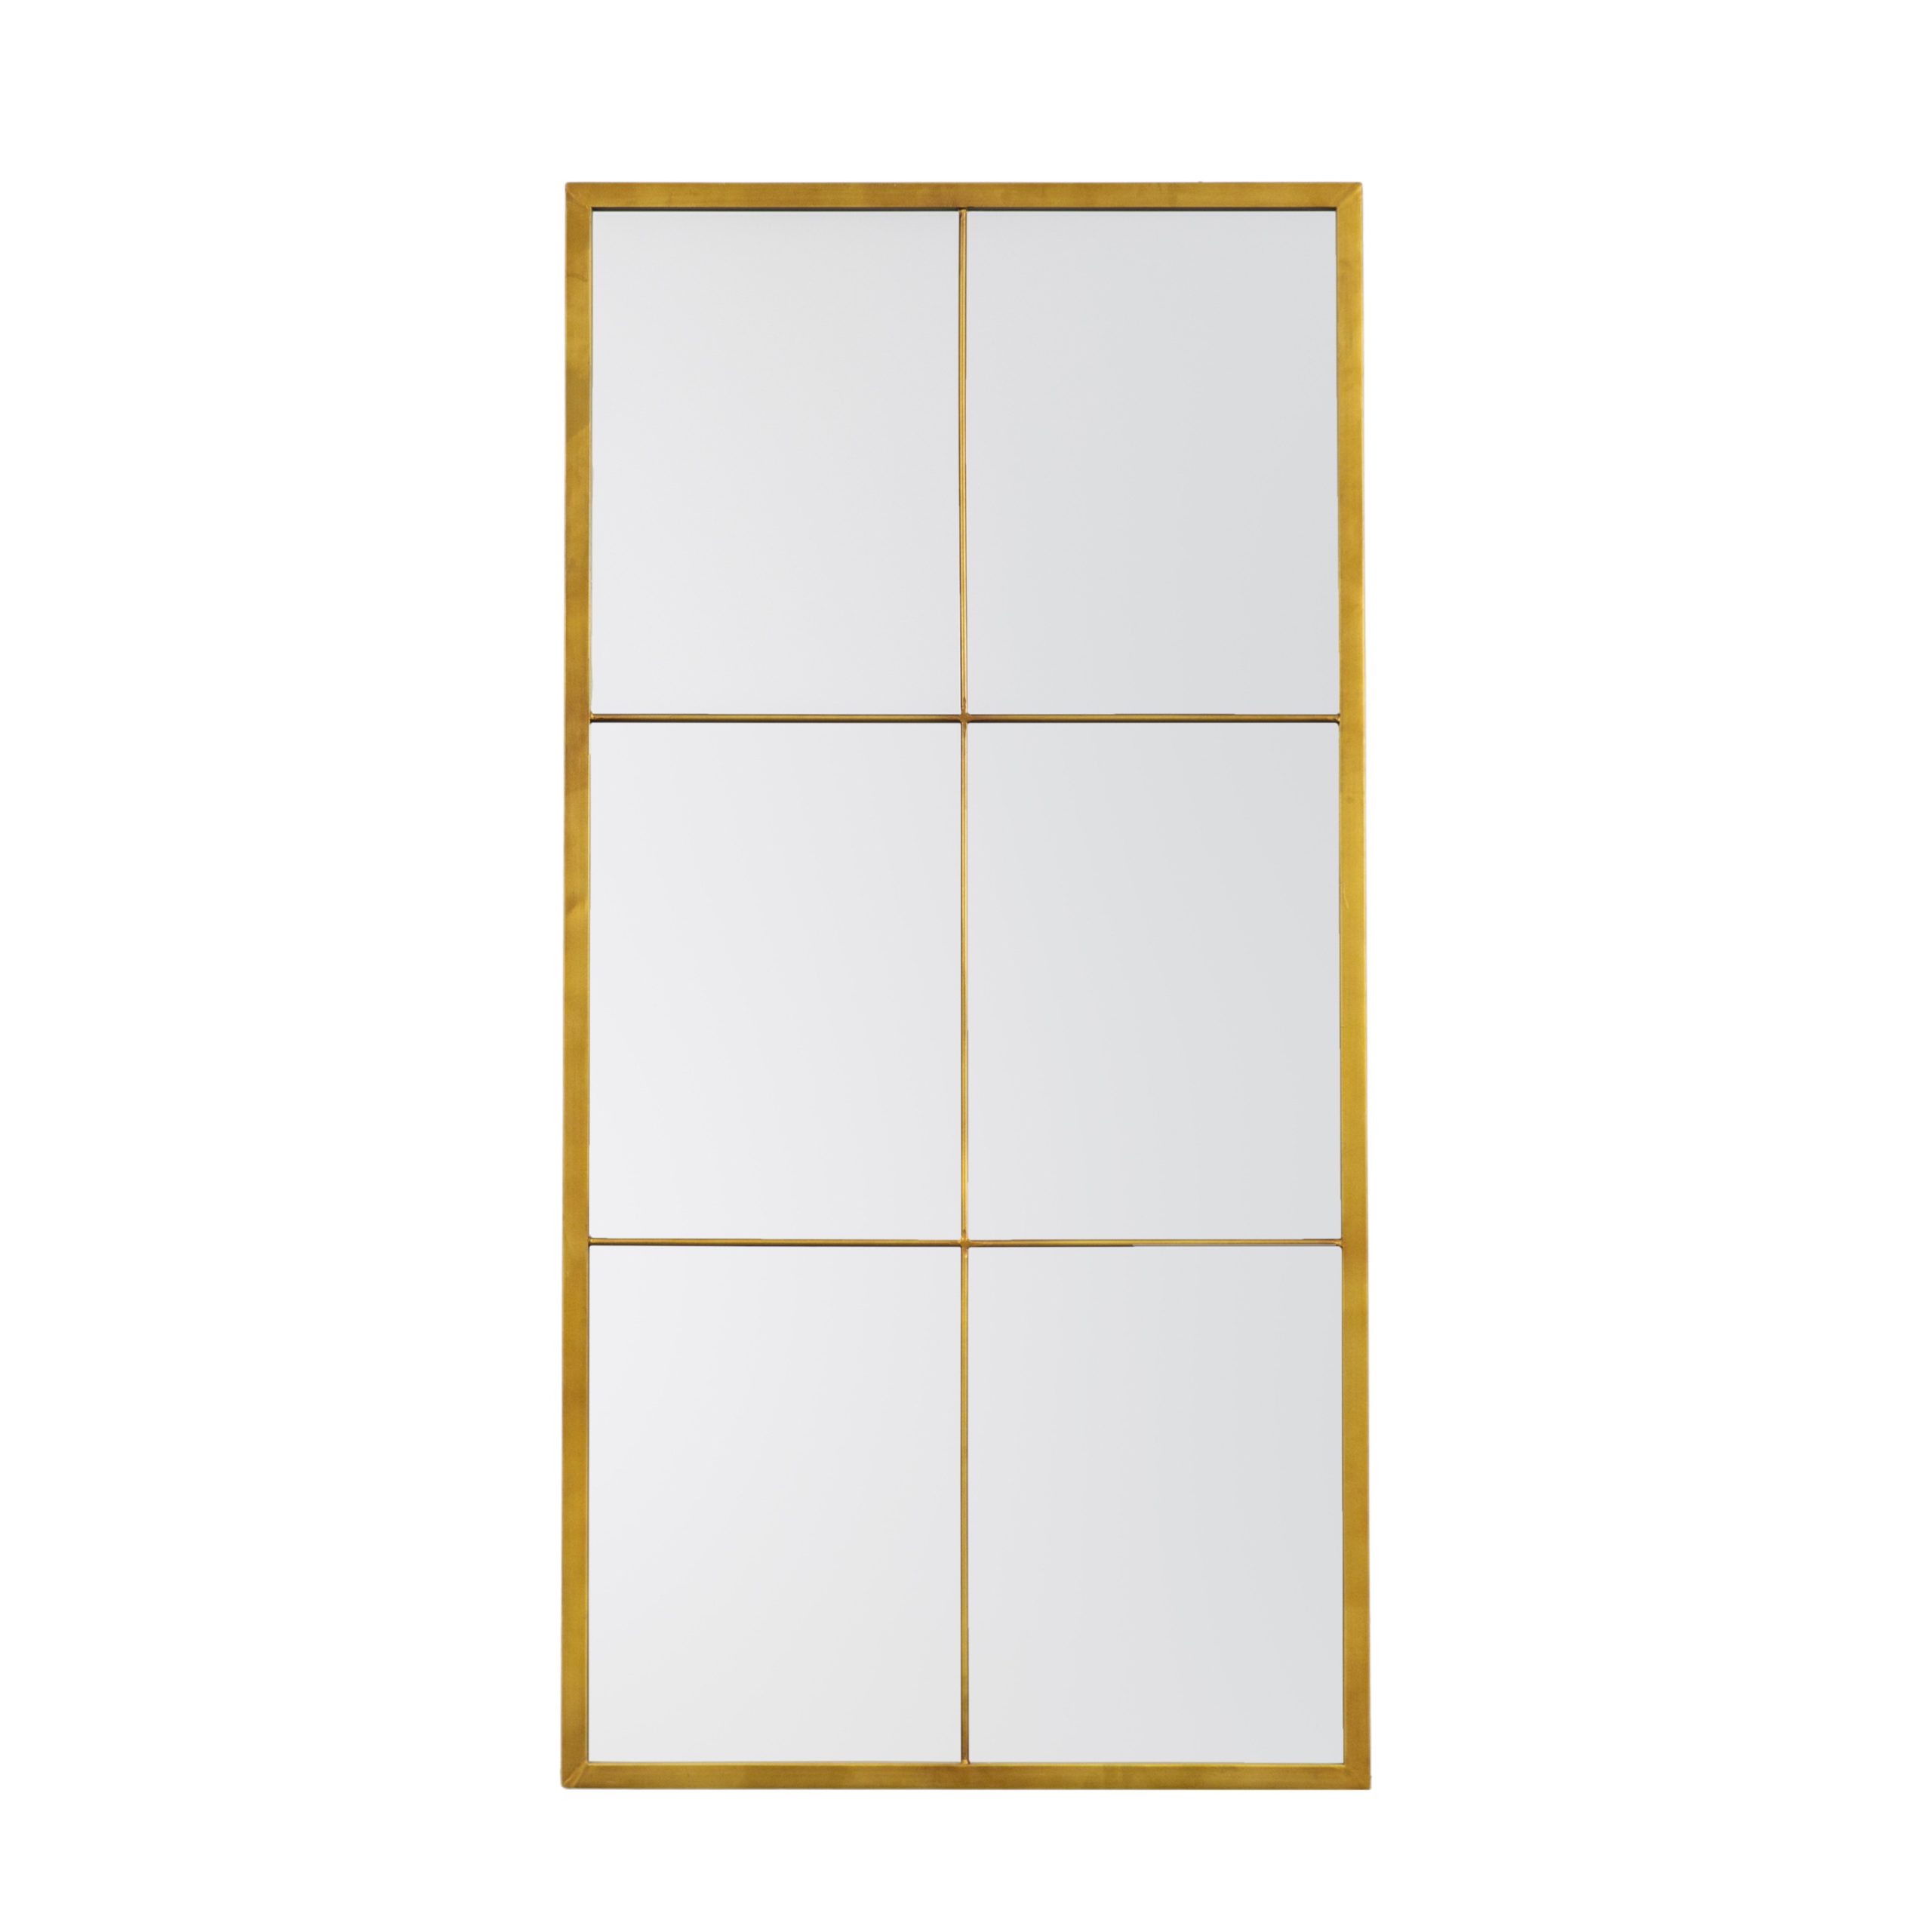 Gallery Direct Wingham Mirror Gold